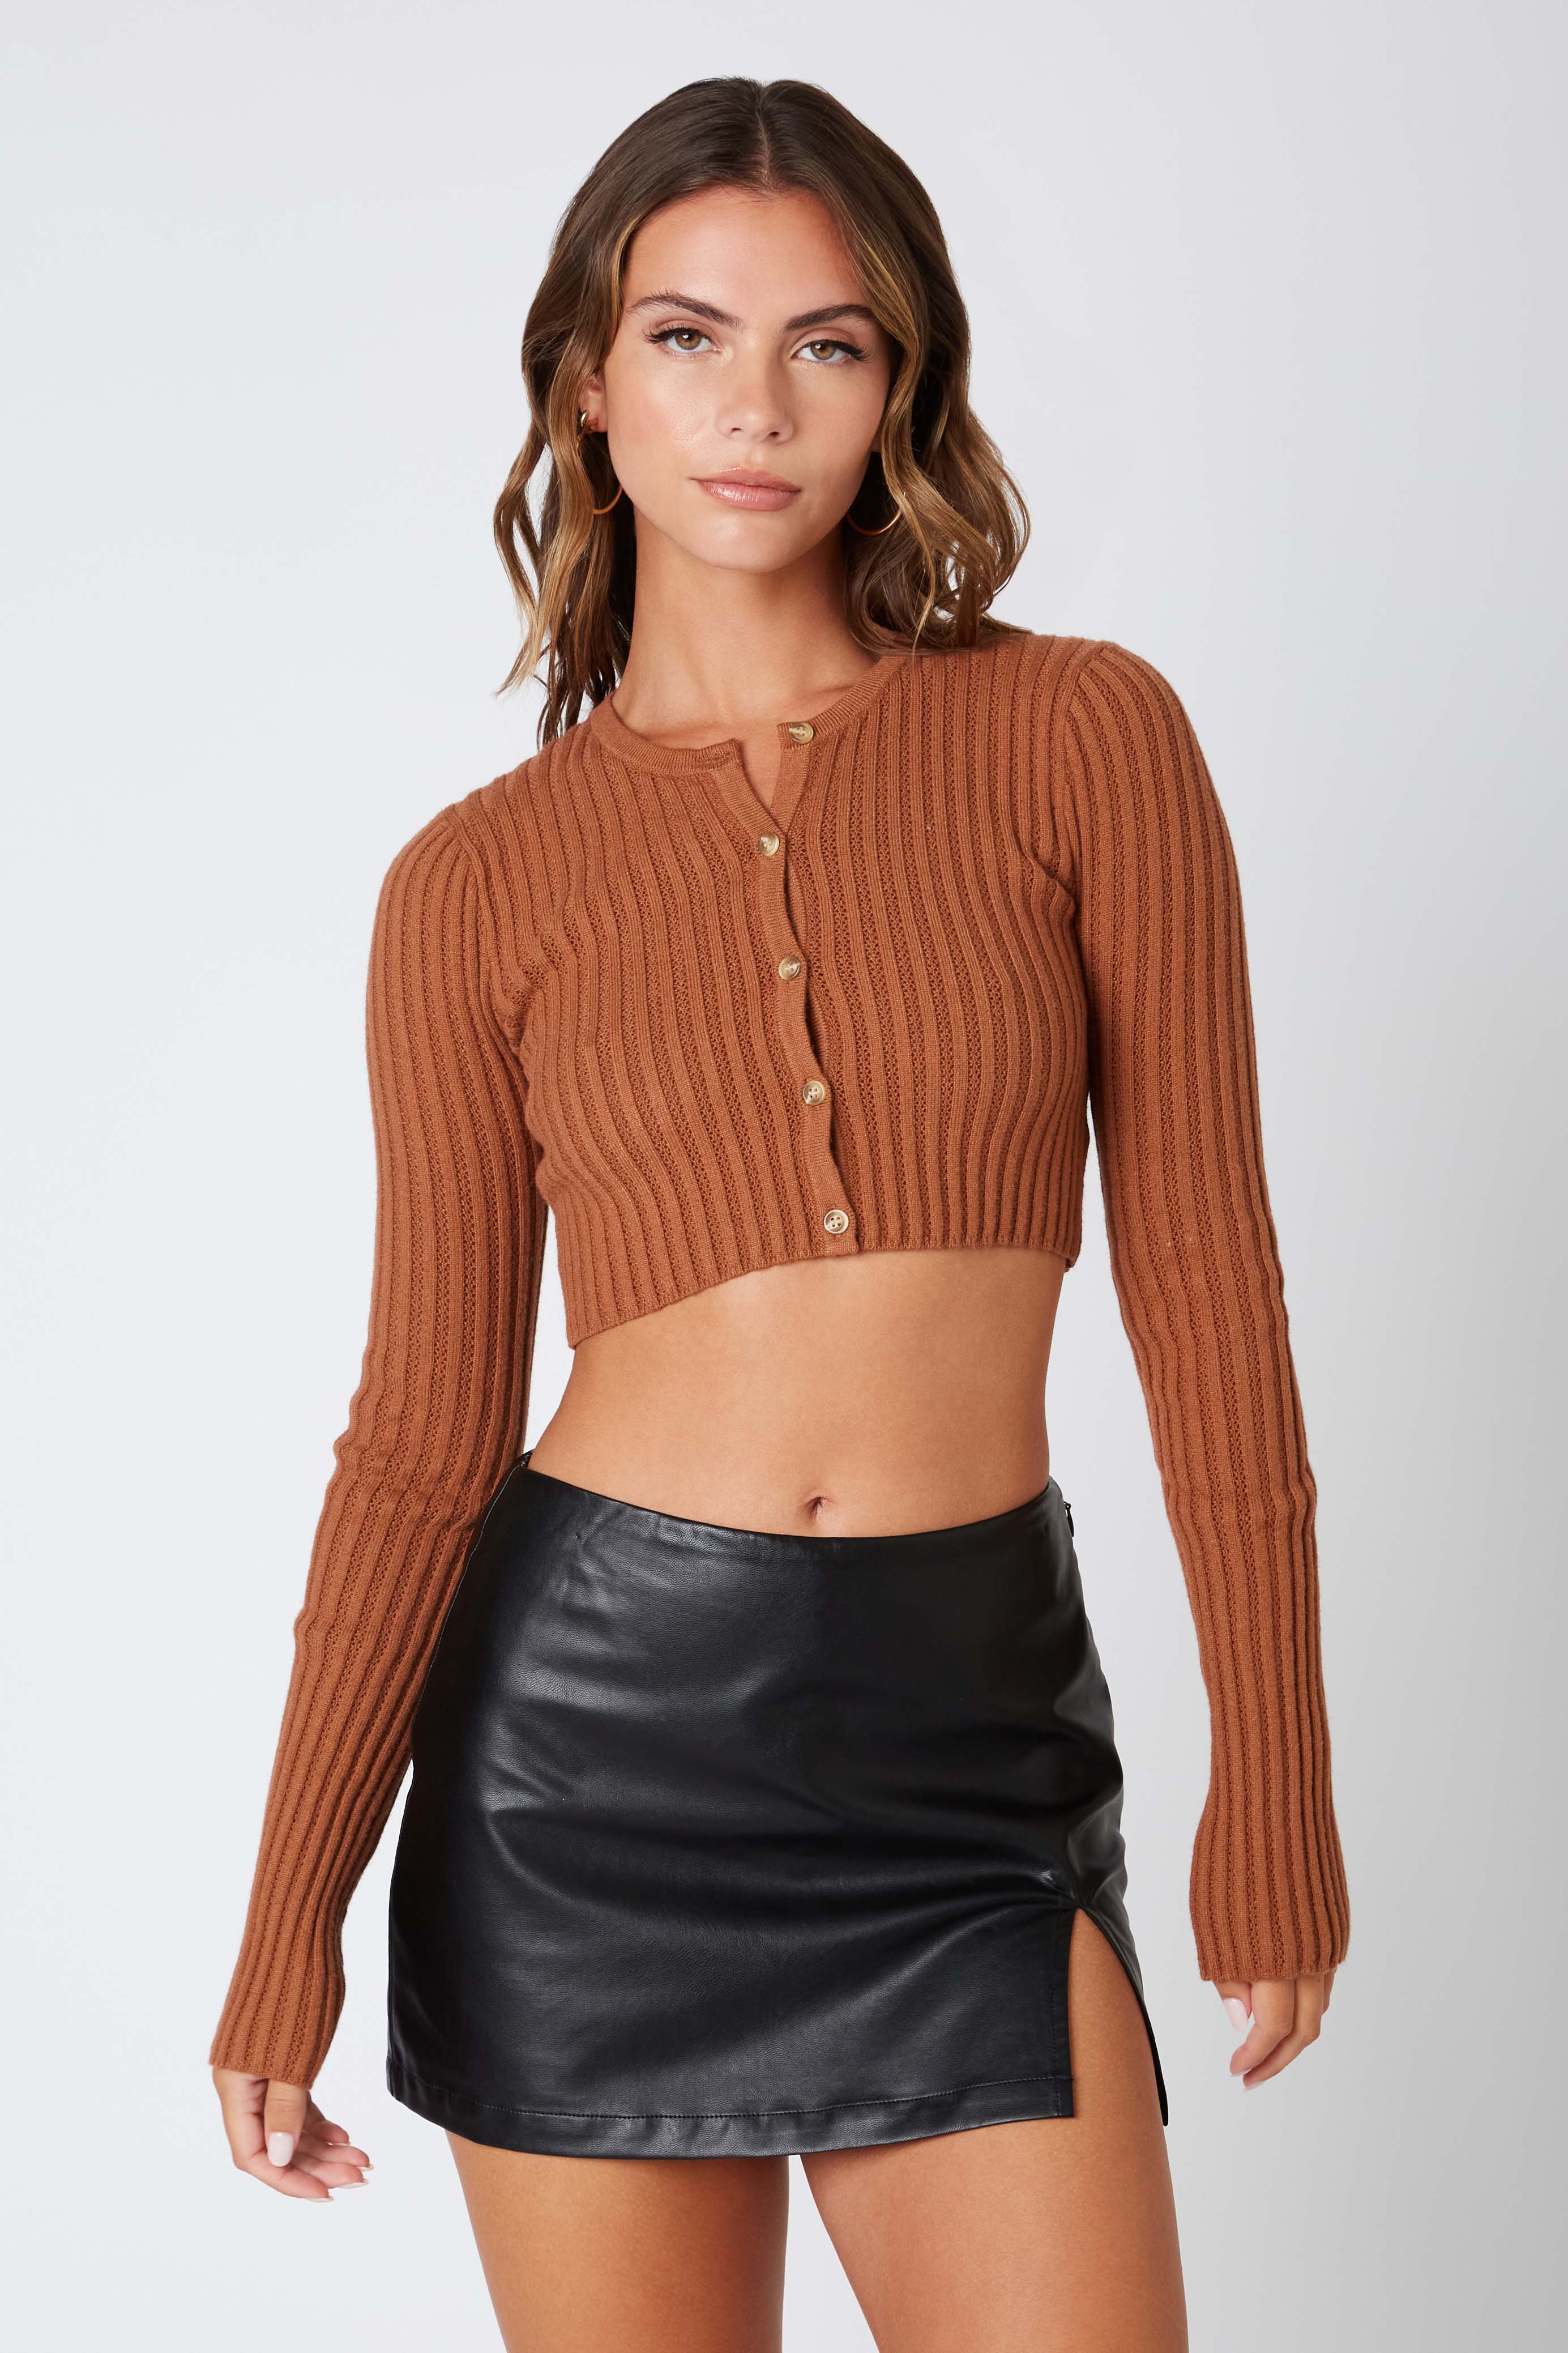 Cropped Cardigan in Bronze Front View